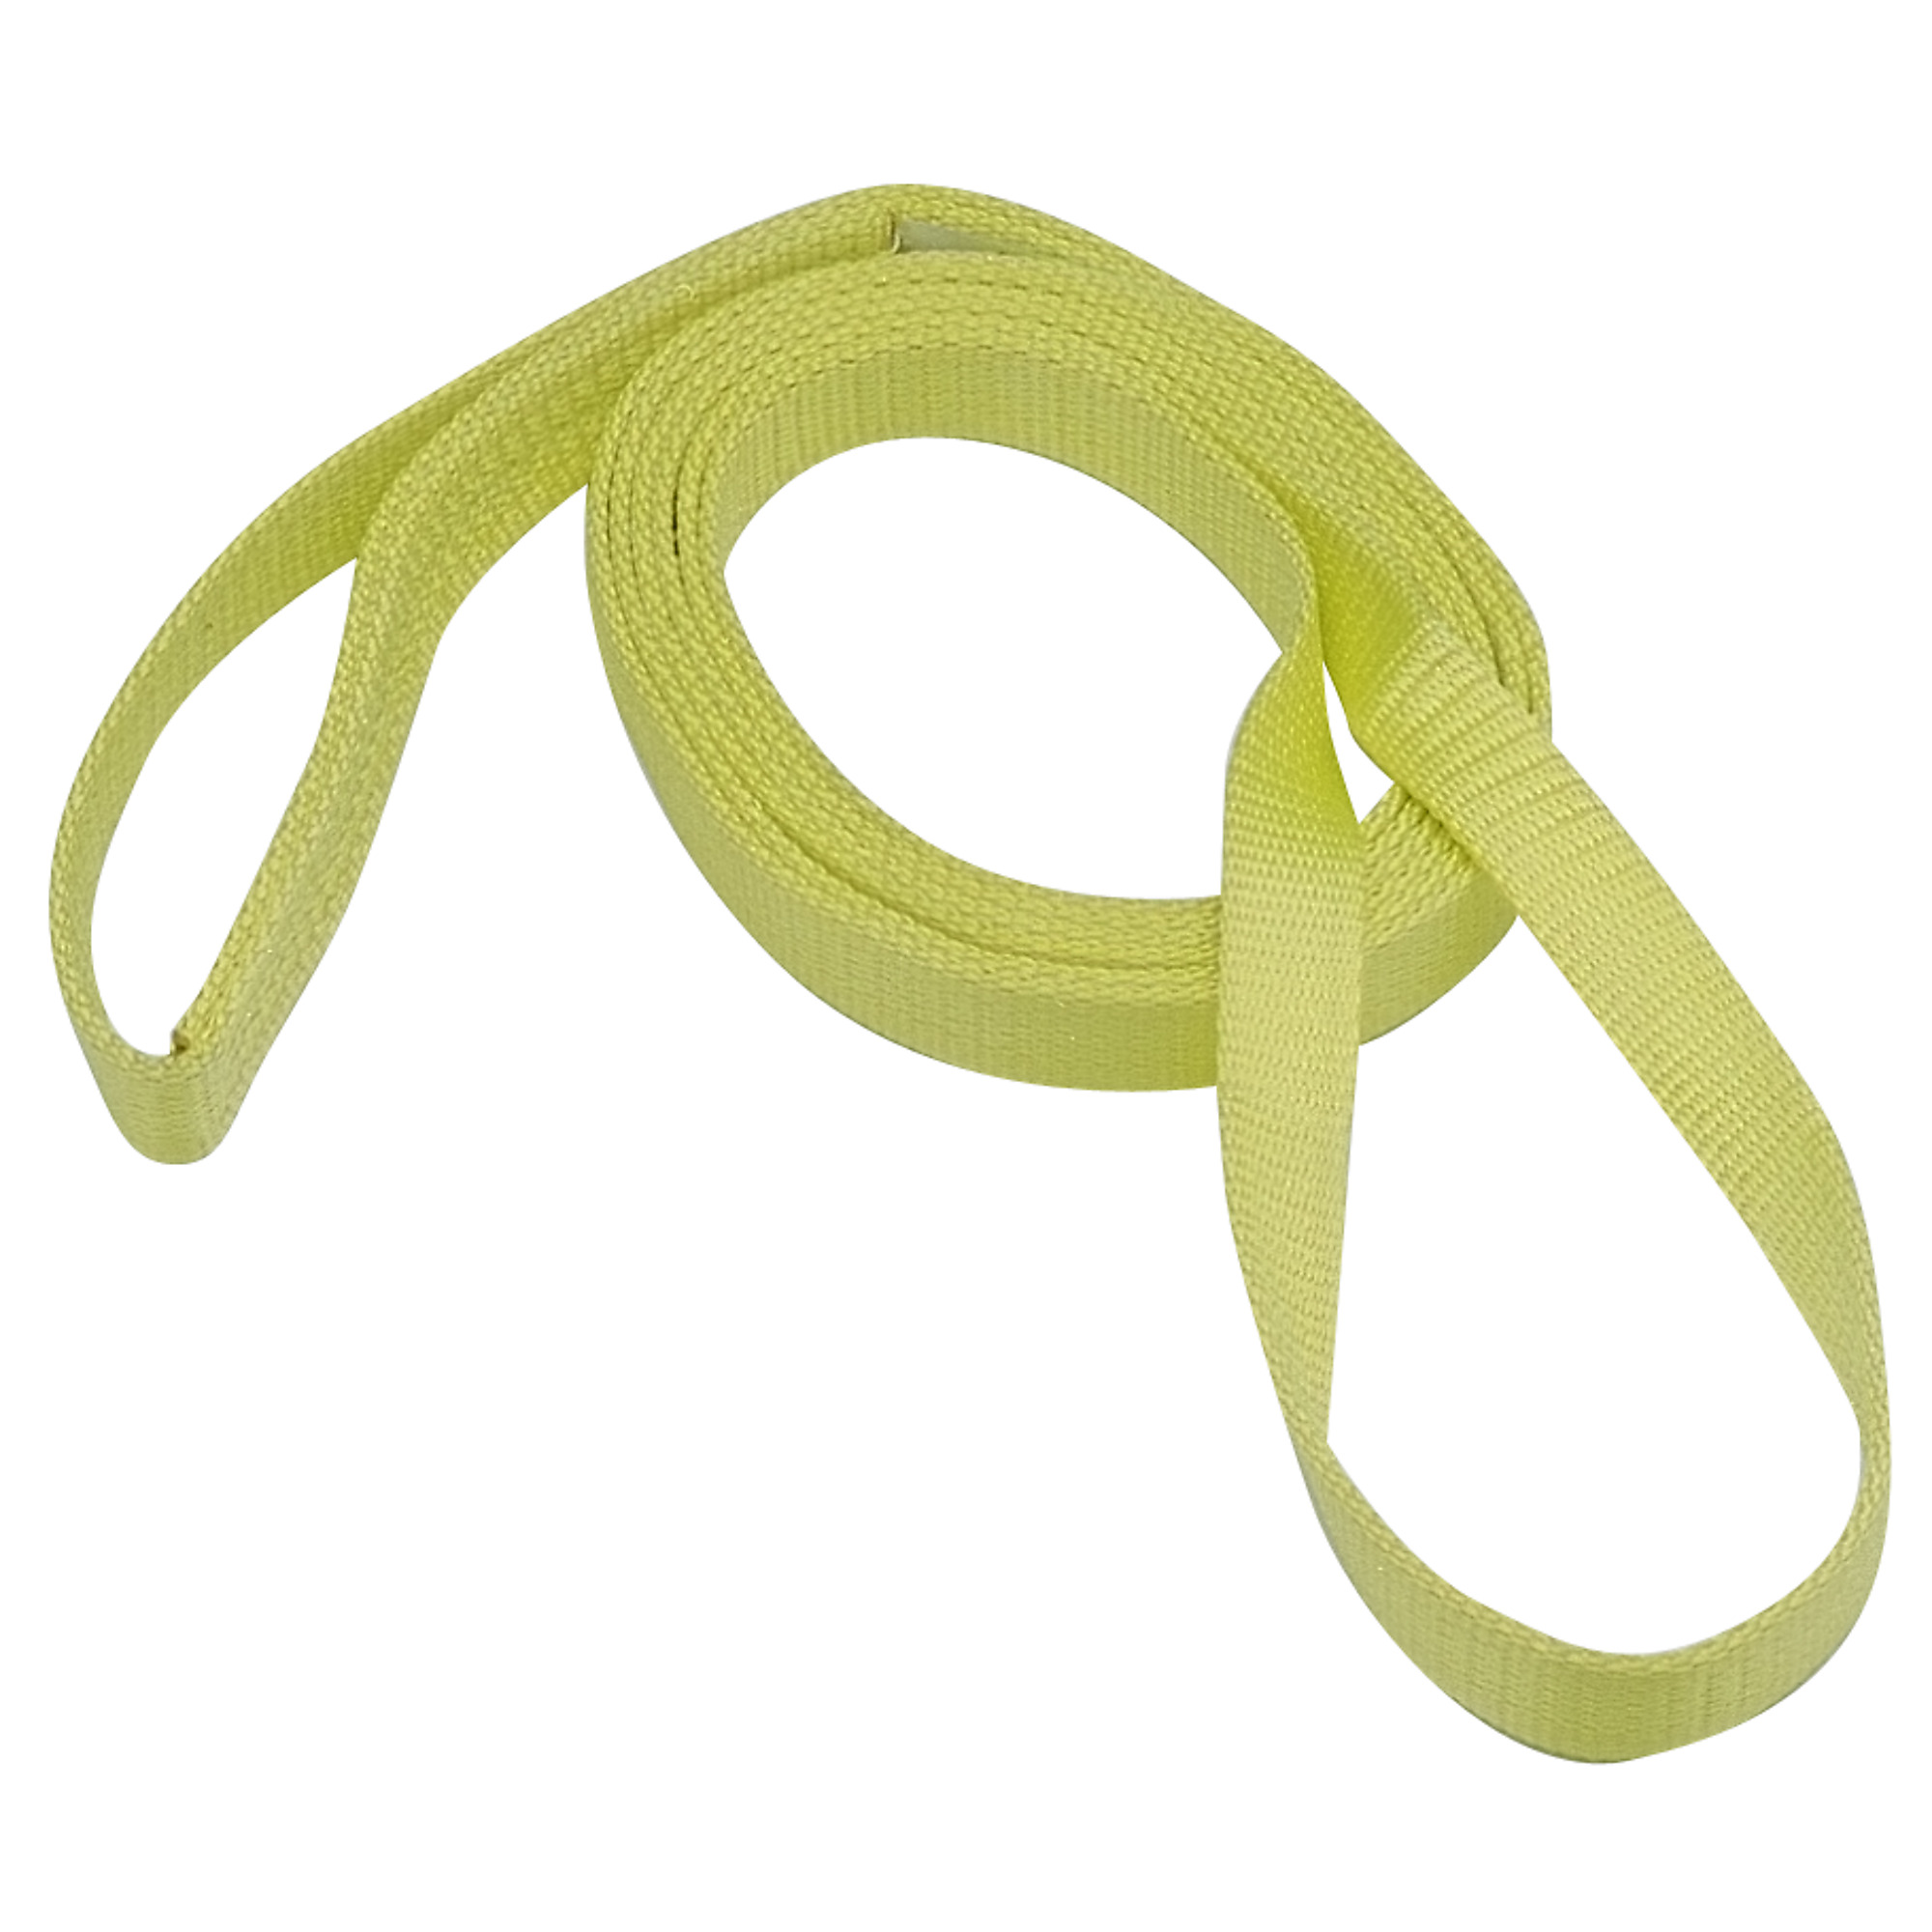 American Power Pull, 8ft. Lifting Sling, Straps (qty.) 1 Model 16200